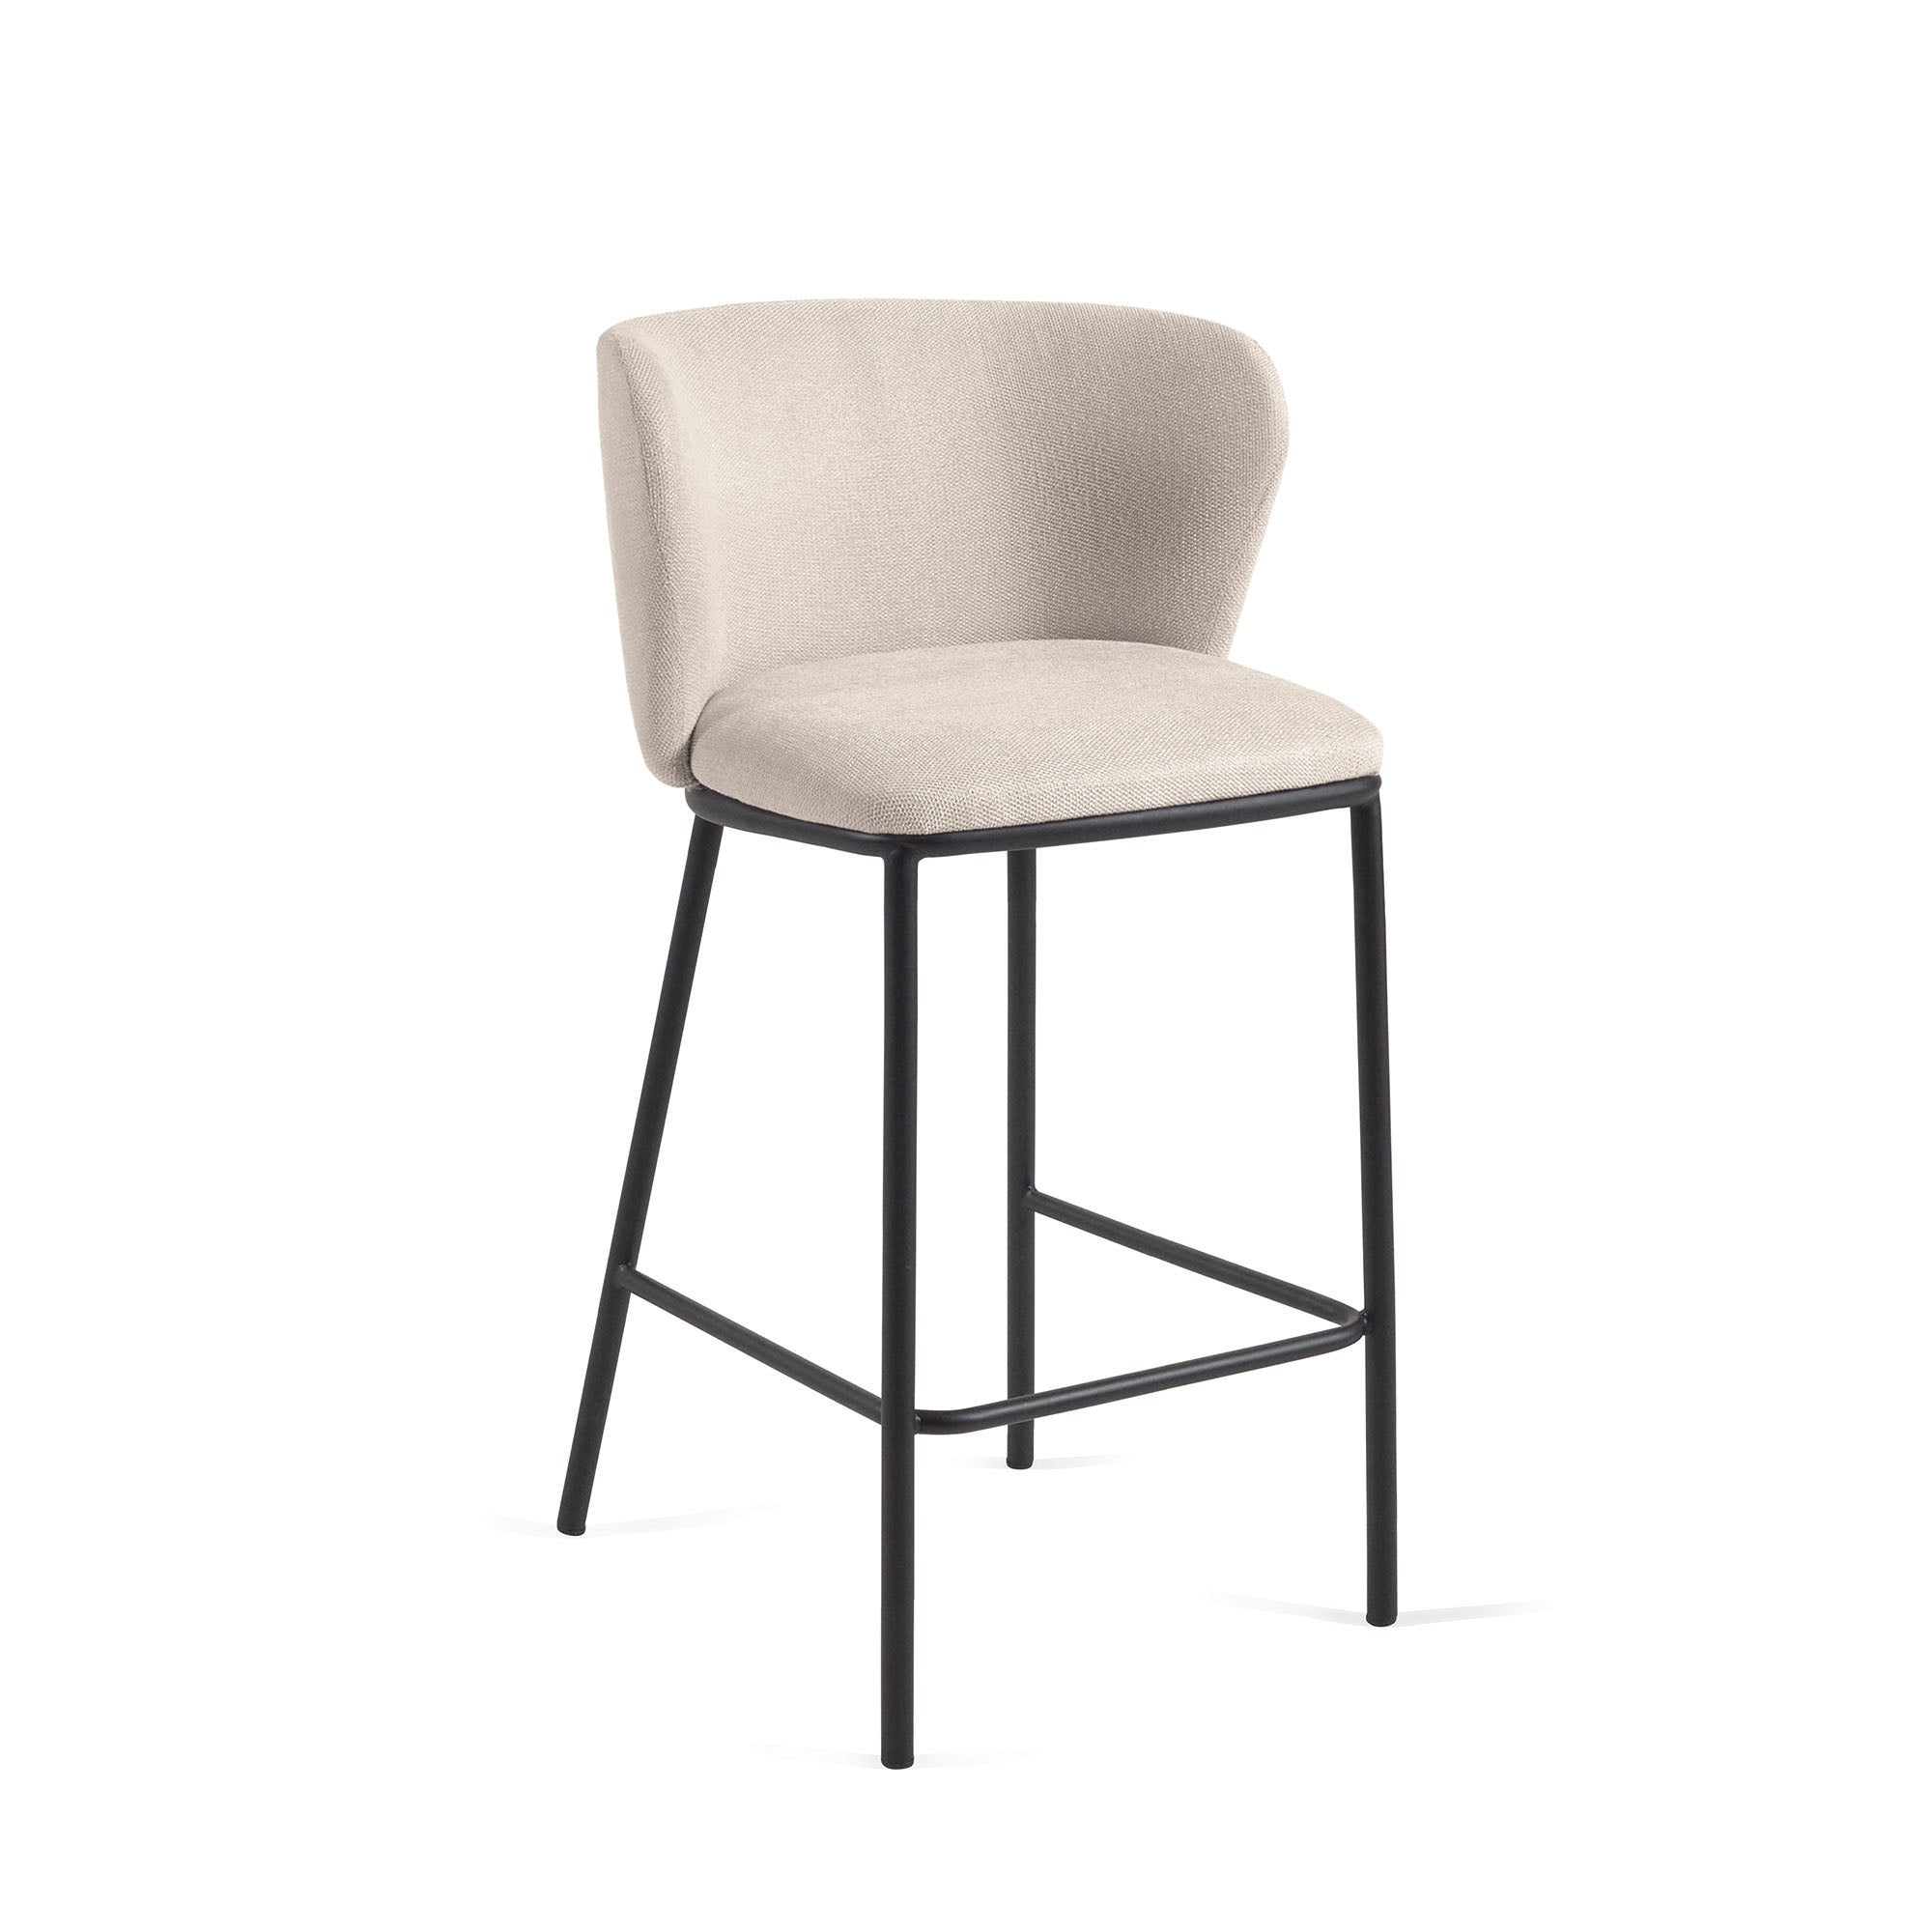 Ciselia stool in beige chenille with steel legs in black finish, 65 cm height